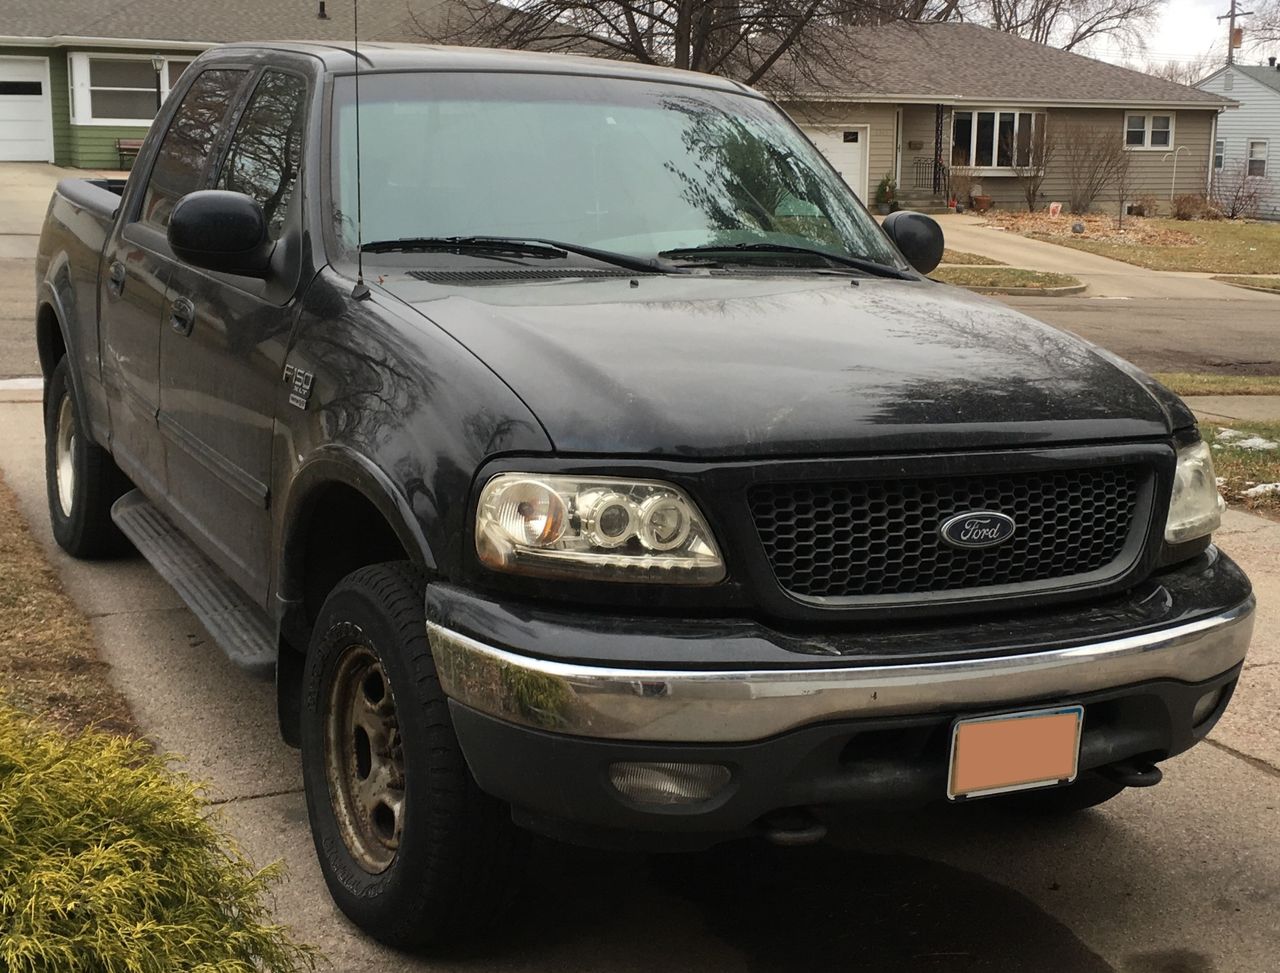 2001 Ford F-150 XLT | Sioux Falls, SD, Black Clearcoat (Black), 4 Wheel